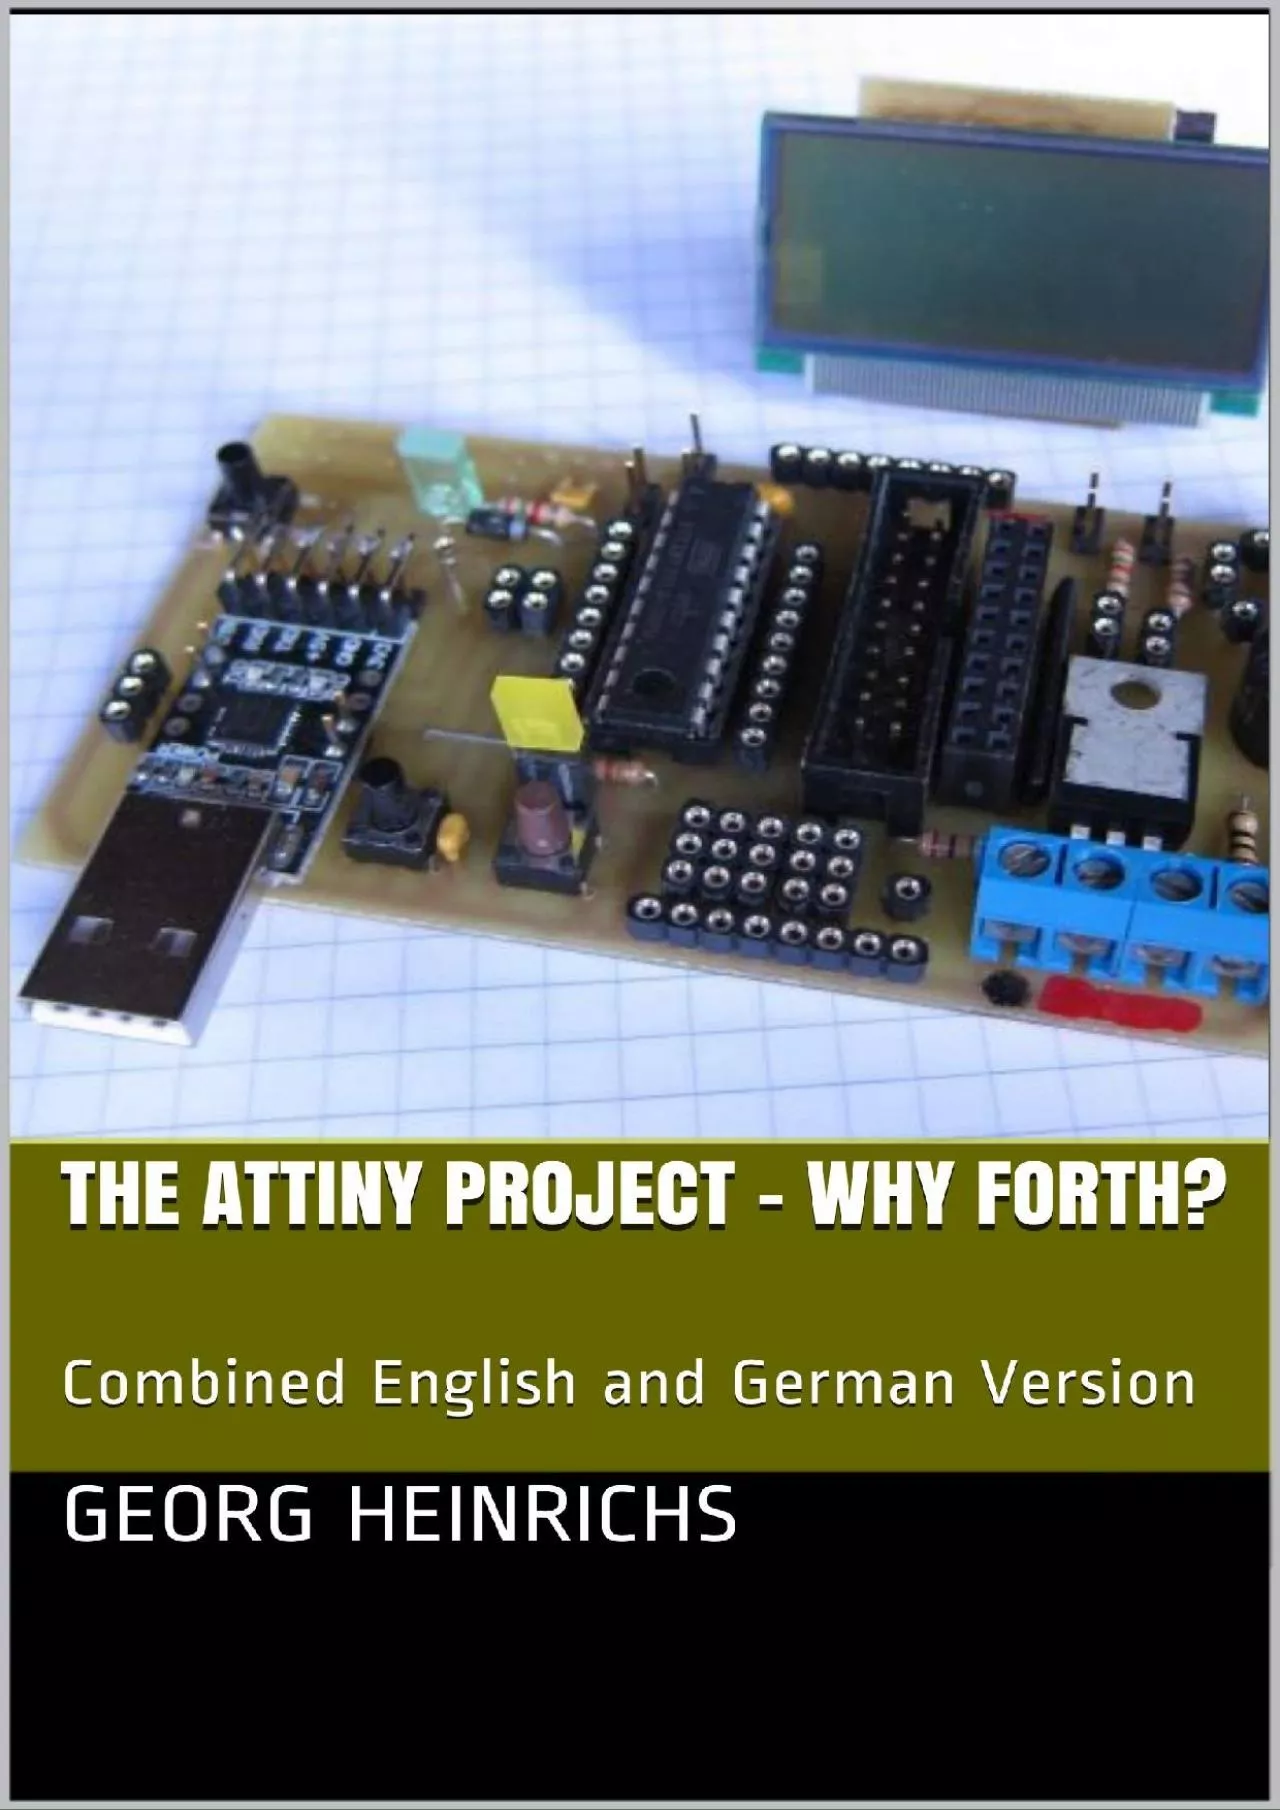 [BEST]-The ATTINY Project - Why Forth?: Combined English and German Version (German Edition)